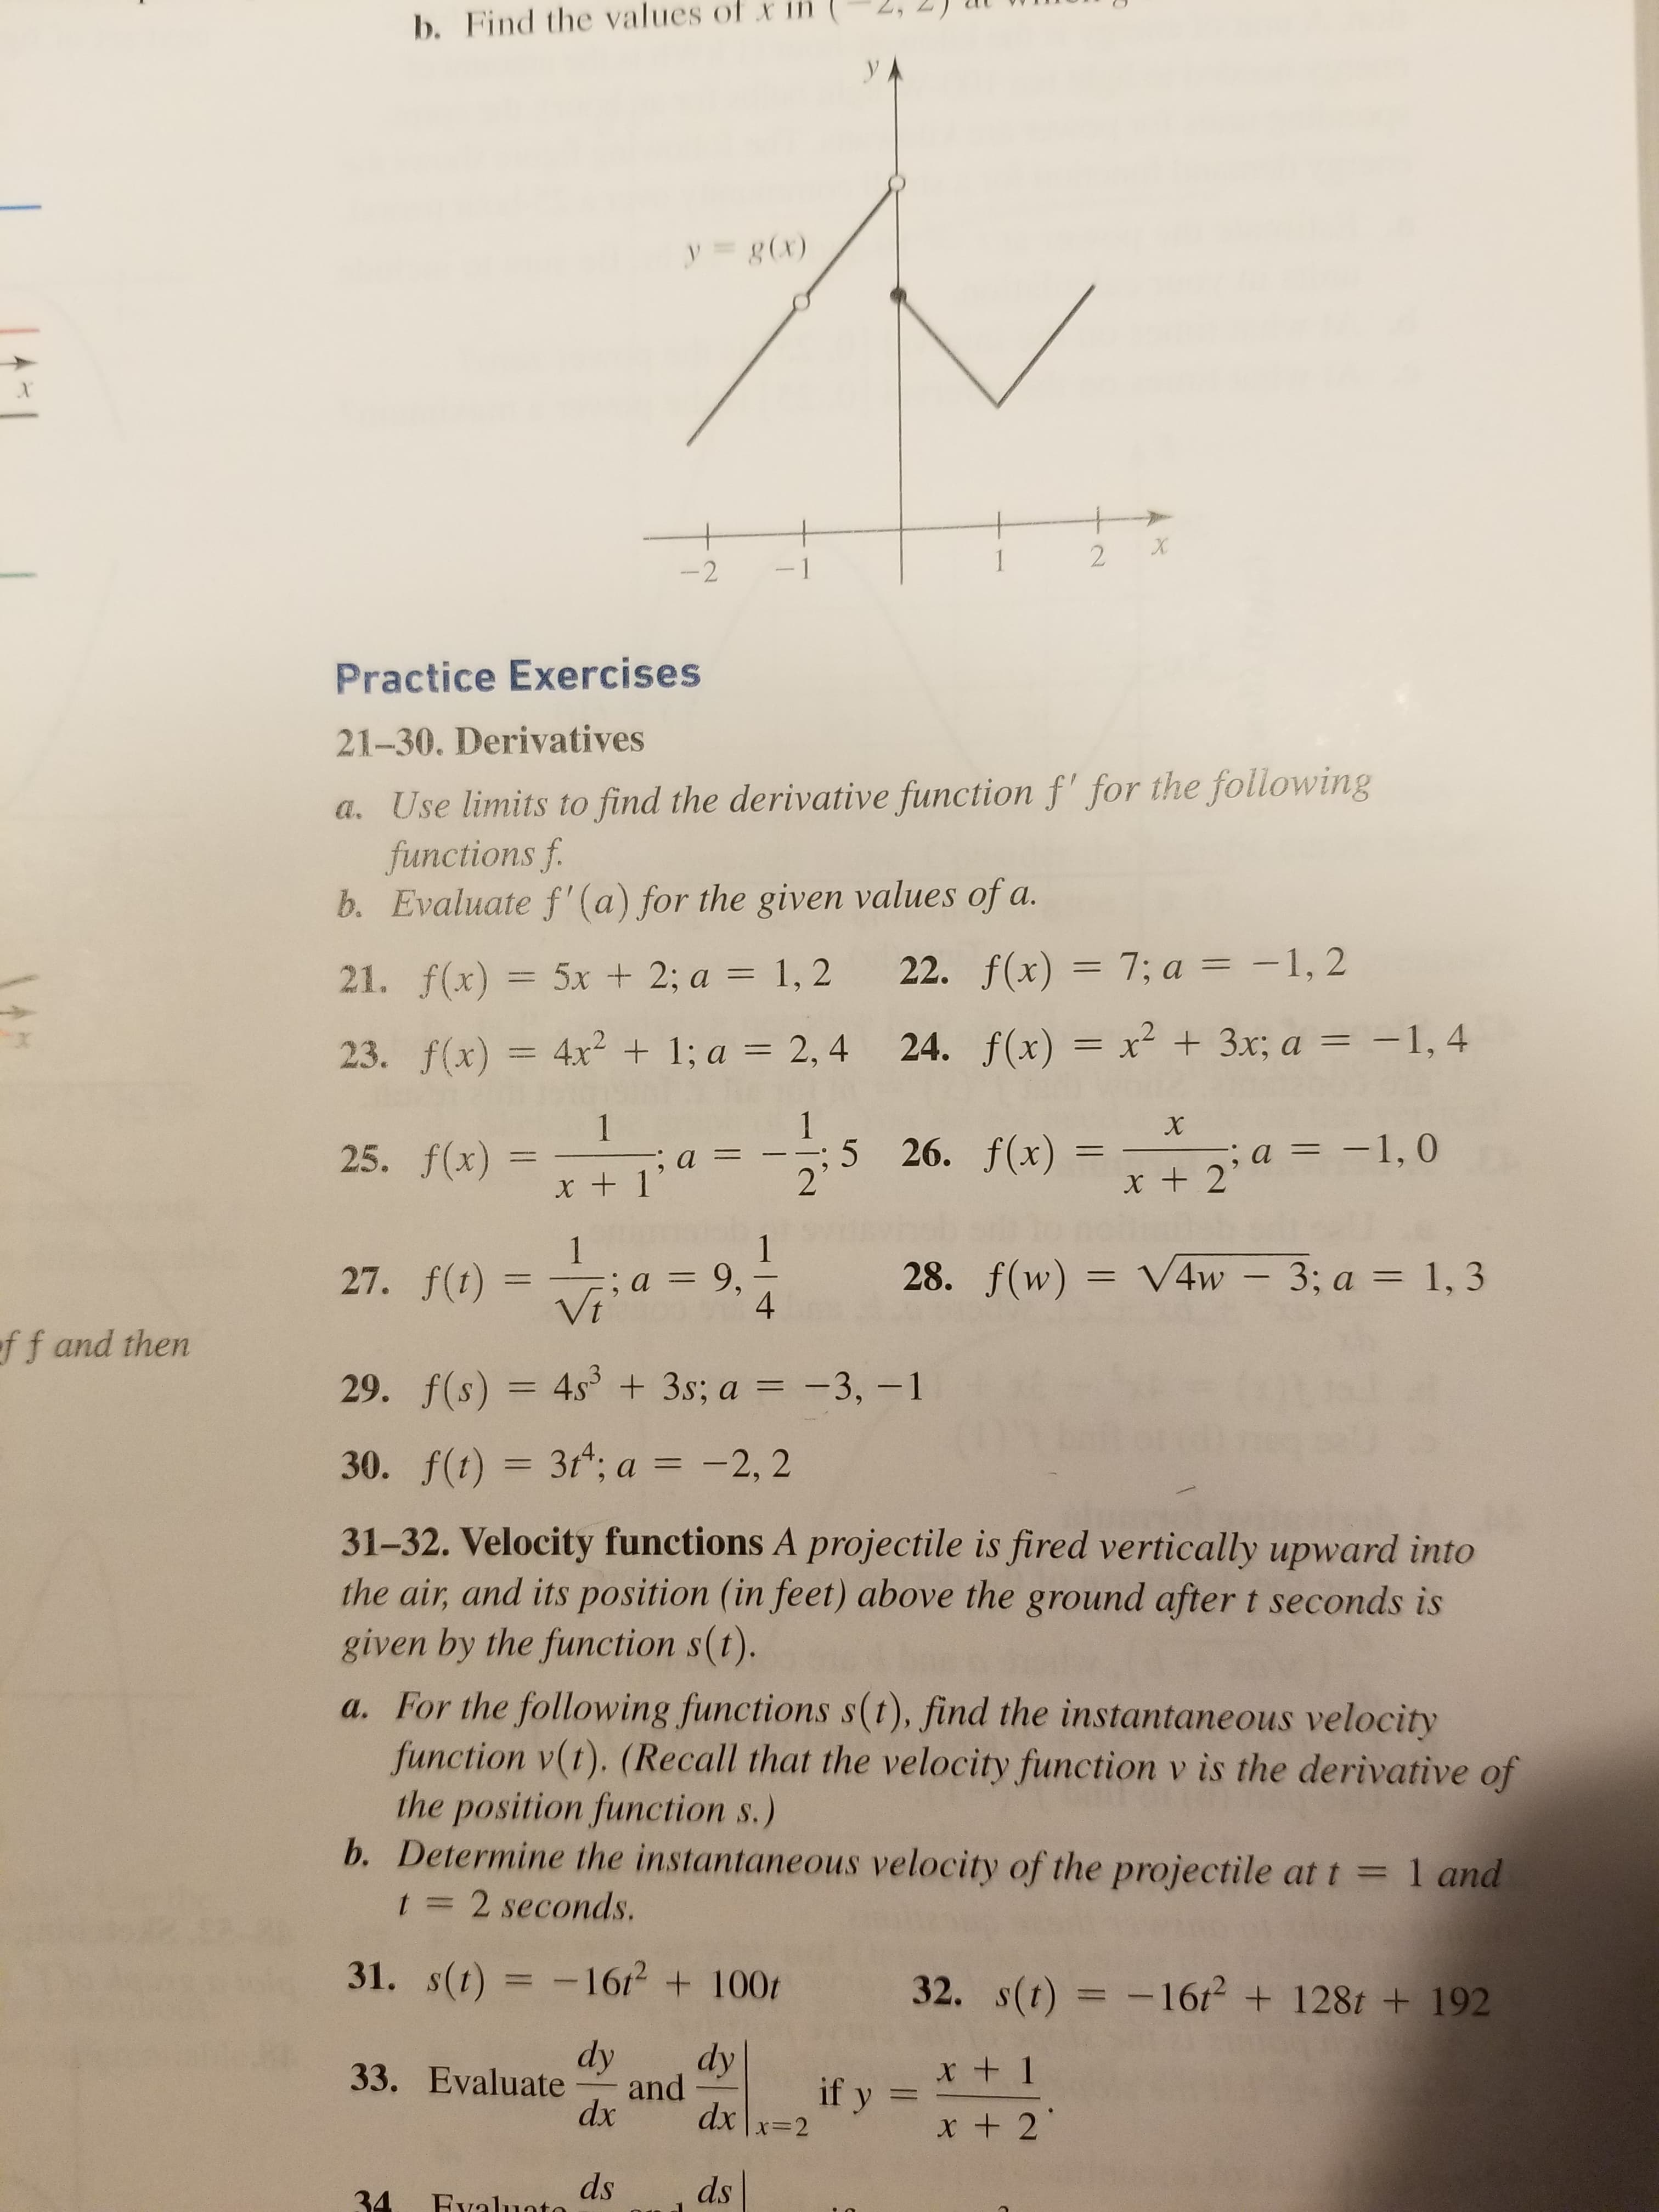 b. Find the values
of
xin
(2,
2)
l
y - gx)
Practice Exercises
21-30. Derivatives
a. Use limits to find the derivative function f for the following
functions f
b. Evaluate f'(a) for the given values of a.
21. f(x) 5x +2: a 1,2 22. fx) 7:a1,2
23. fx)42+1: a 2,4 24. fx)3x: a1.4
25.
26.x)2:a 1.0
x + 1
x+ 2
27,
f(t) =-; a = 9,
28, f(w) = V4w-3; a = 1,3
f
f and then
29. f(s) 4s + 3s; a 3,-1
30. f(t) = 3t4; a =-2,2
31-32. Velocity functions A projectile is fired vertically upward into
the air, and its position (in feet) above the ground after t seconds is
given by the function s(t).
a. For the following functions s(t), find the instantaneous velocity
function v(1). (Recall that the velocity function v is the derivative of
the position fiunction s.)
b. Determine the instantaneous velocity of the projectile at t
31. s()1612 100 32. s(t)1612 128t + 192
33. Evaluate rand Lifys_
34dnds
1 and
1 2 seconds.
dy dy
x+ 1
x 2
